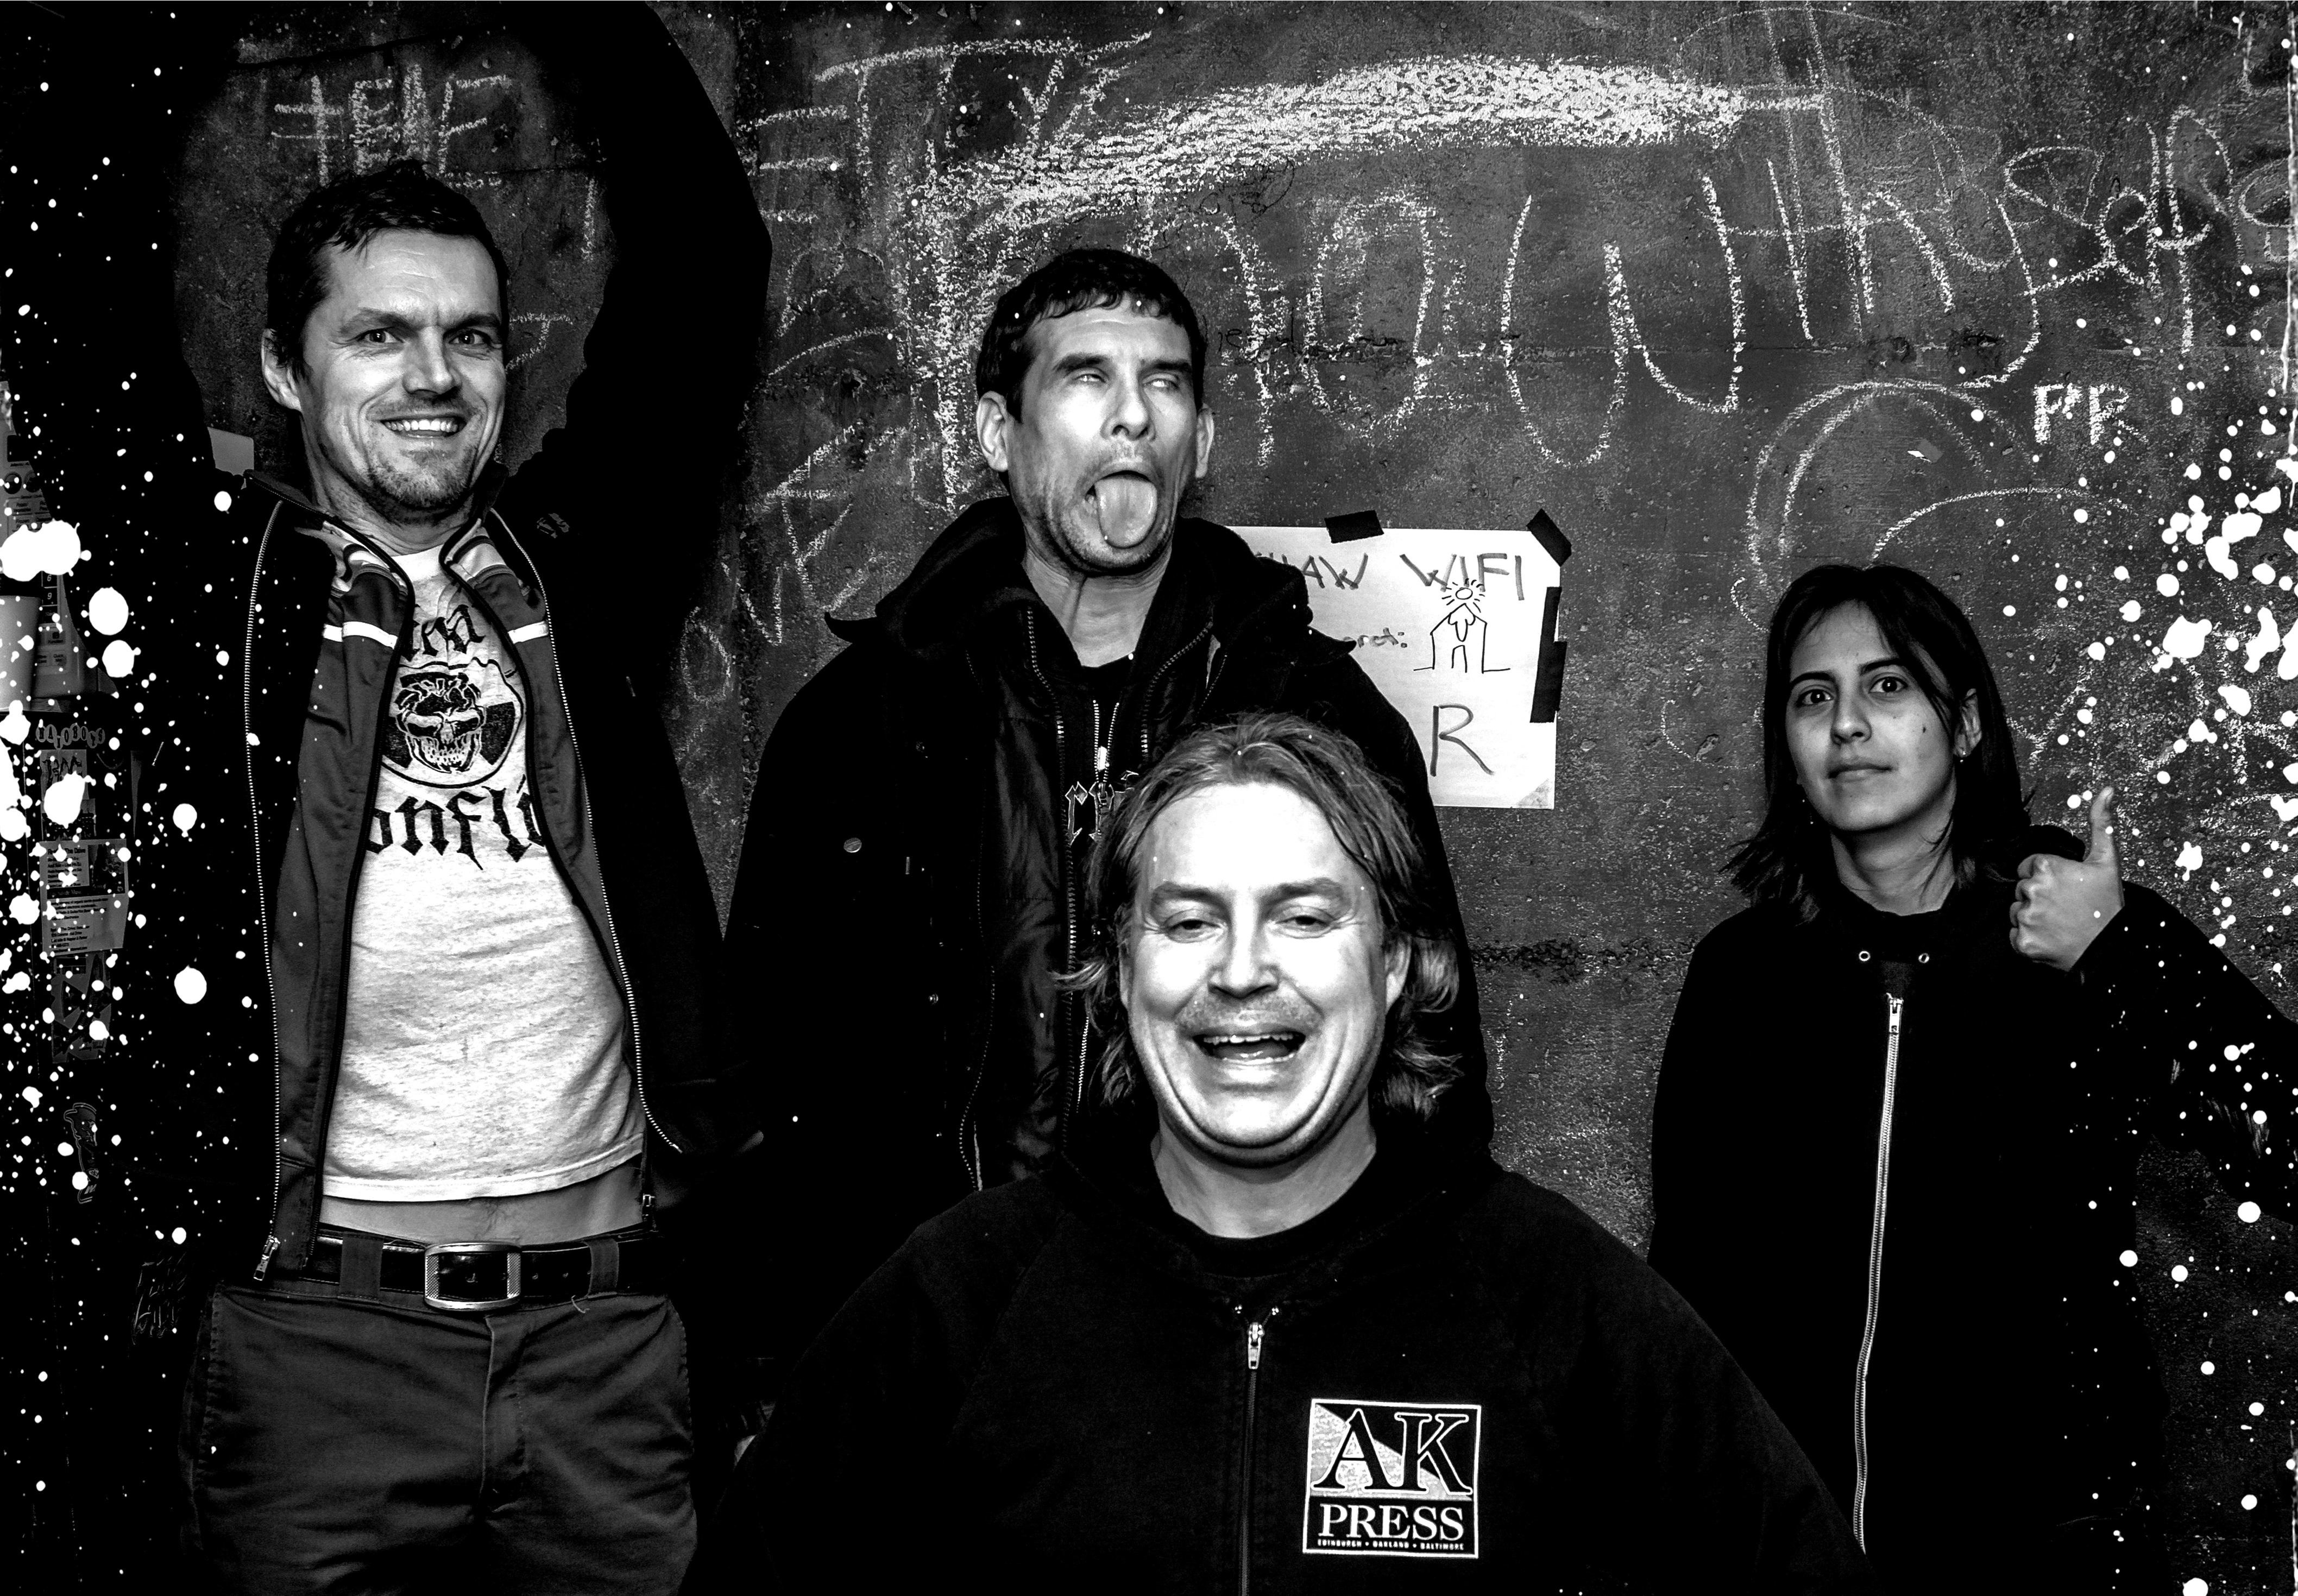 PROPAGANDHI - CANCELLED - REFUNDS TO BE ISSUED 